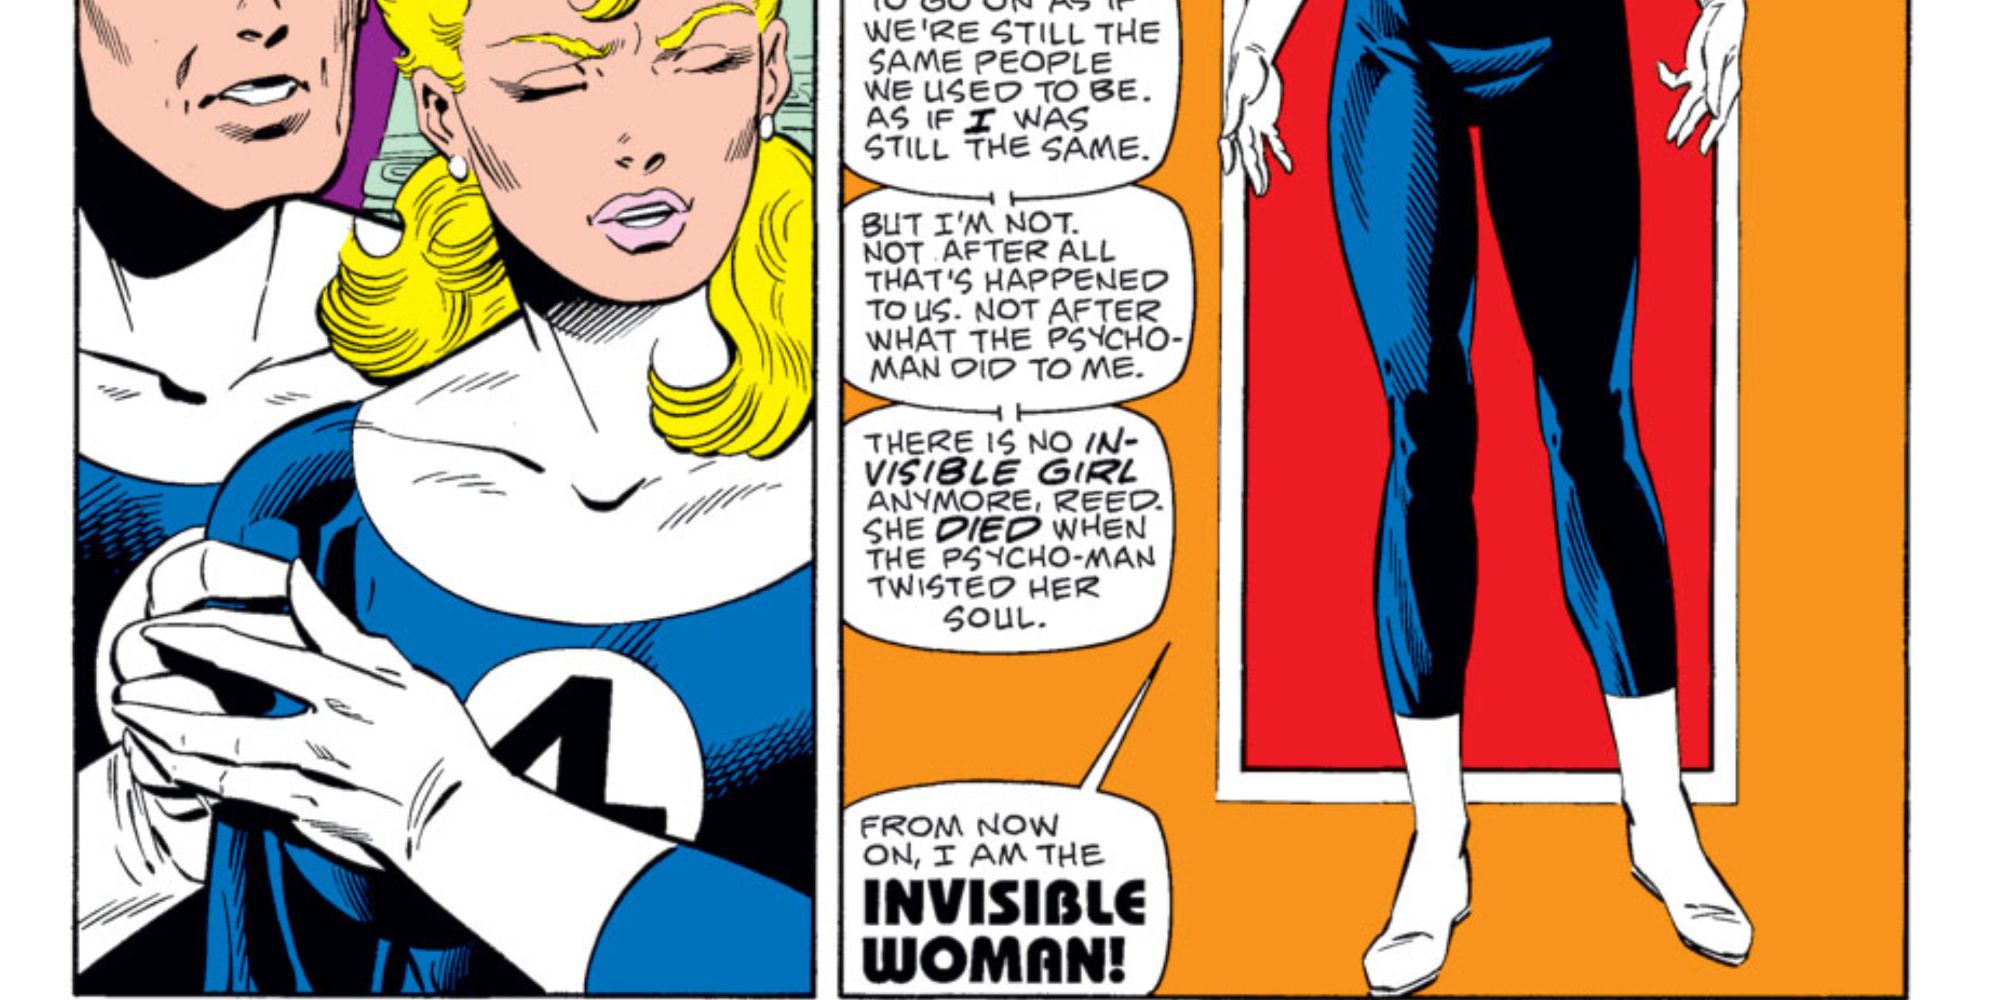 Sue Storm becomes the Invisible Woman in Marvel Comics.